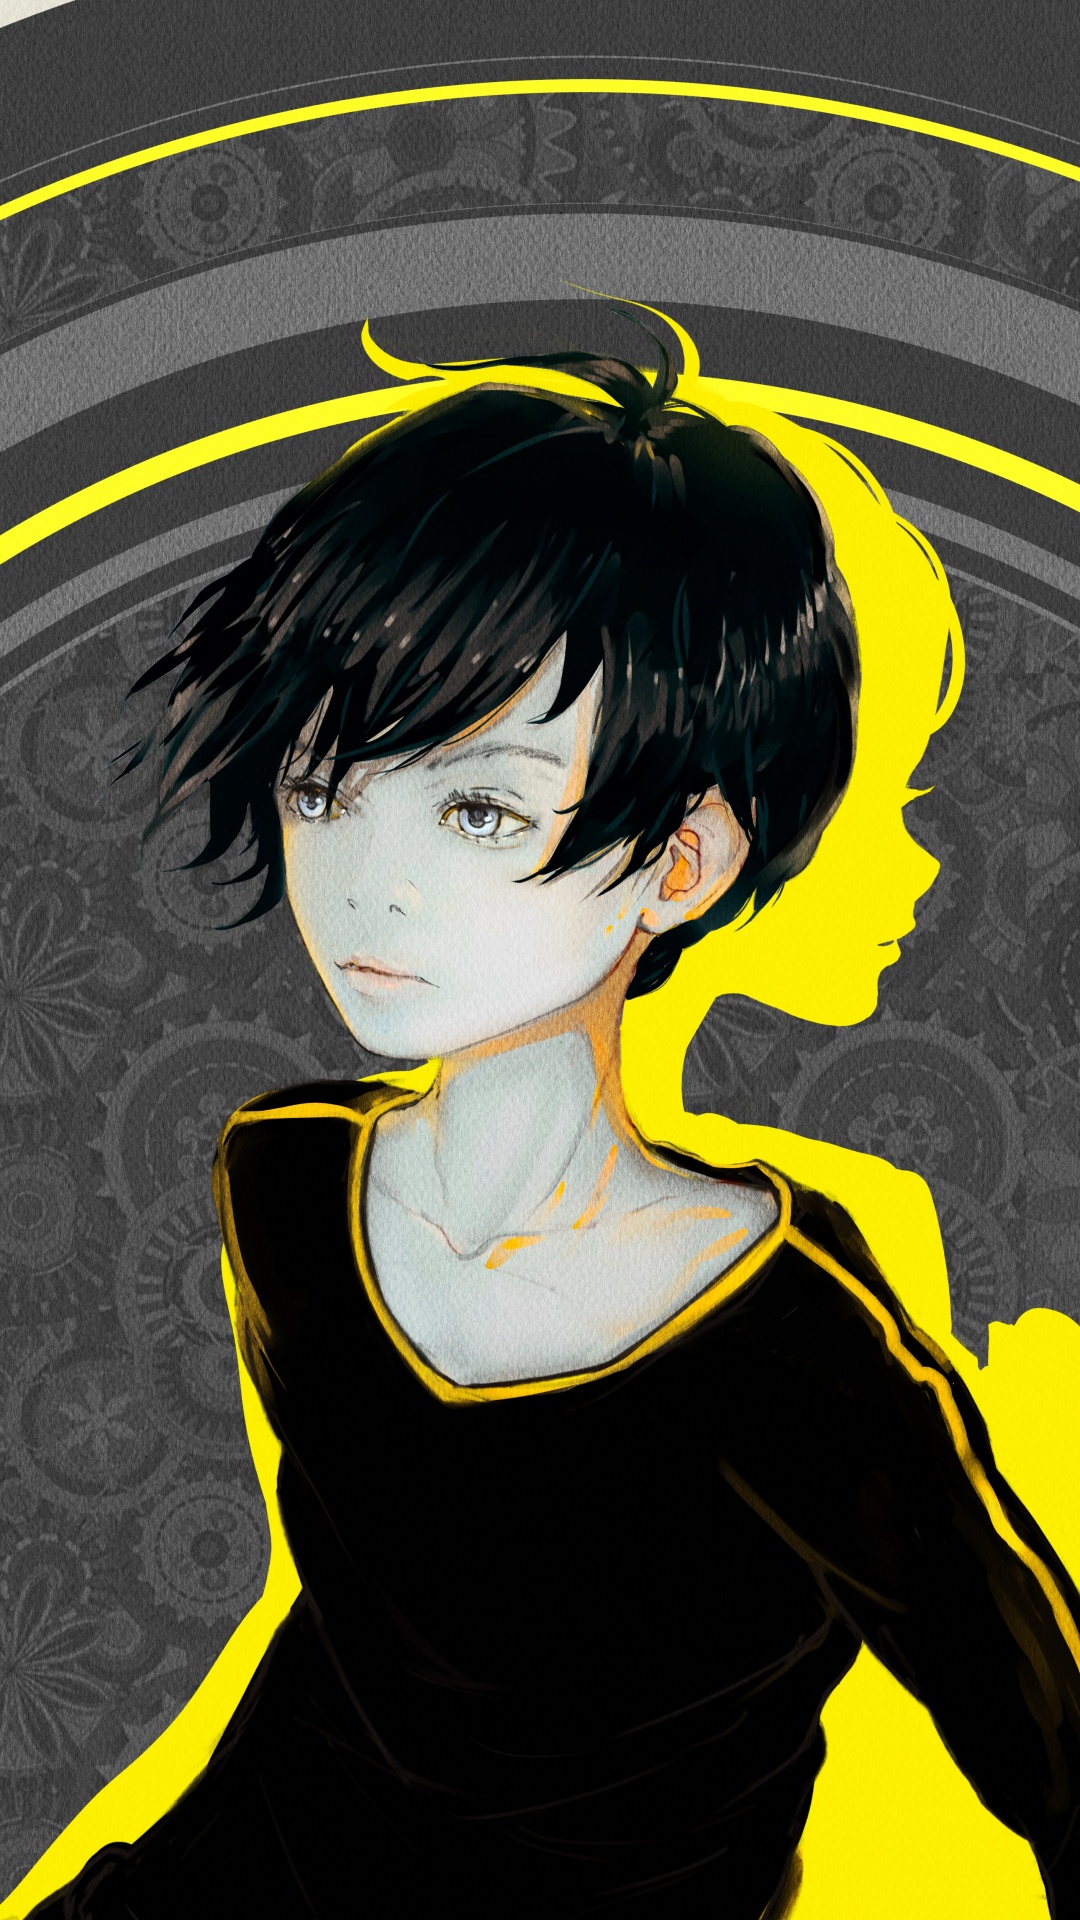 Personnage D'anime Masculin Aux Cheveux Noirs. Wallpaper in 1080x1920 Resolution